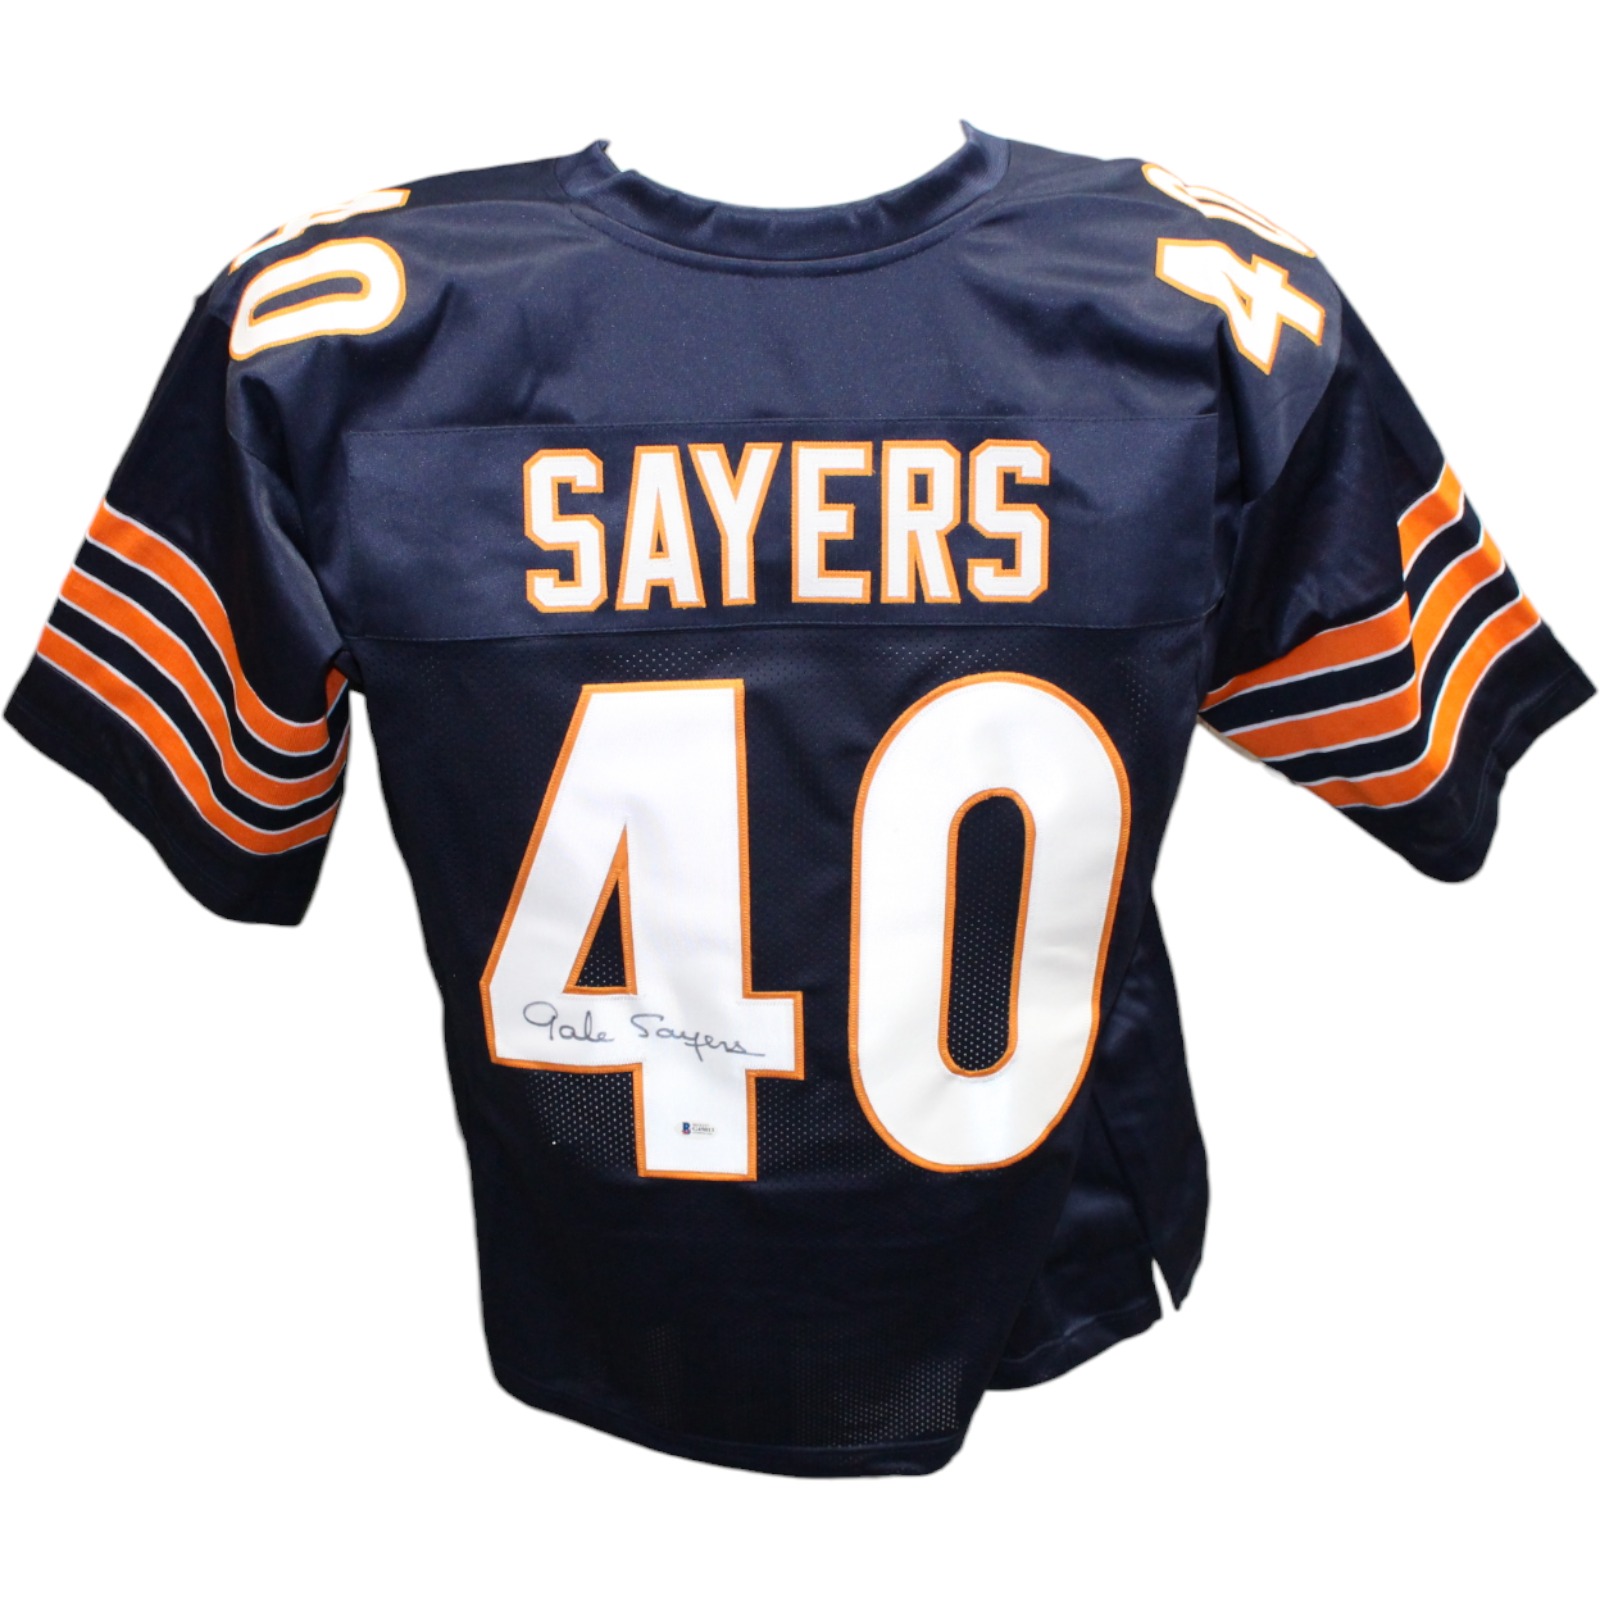 Gale Sayers Autographed/Signed Navy Pro Style Jersey Beckett